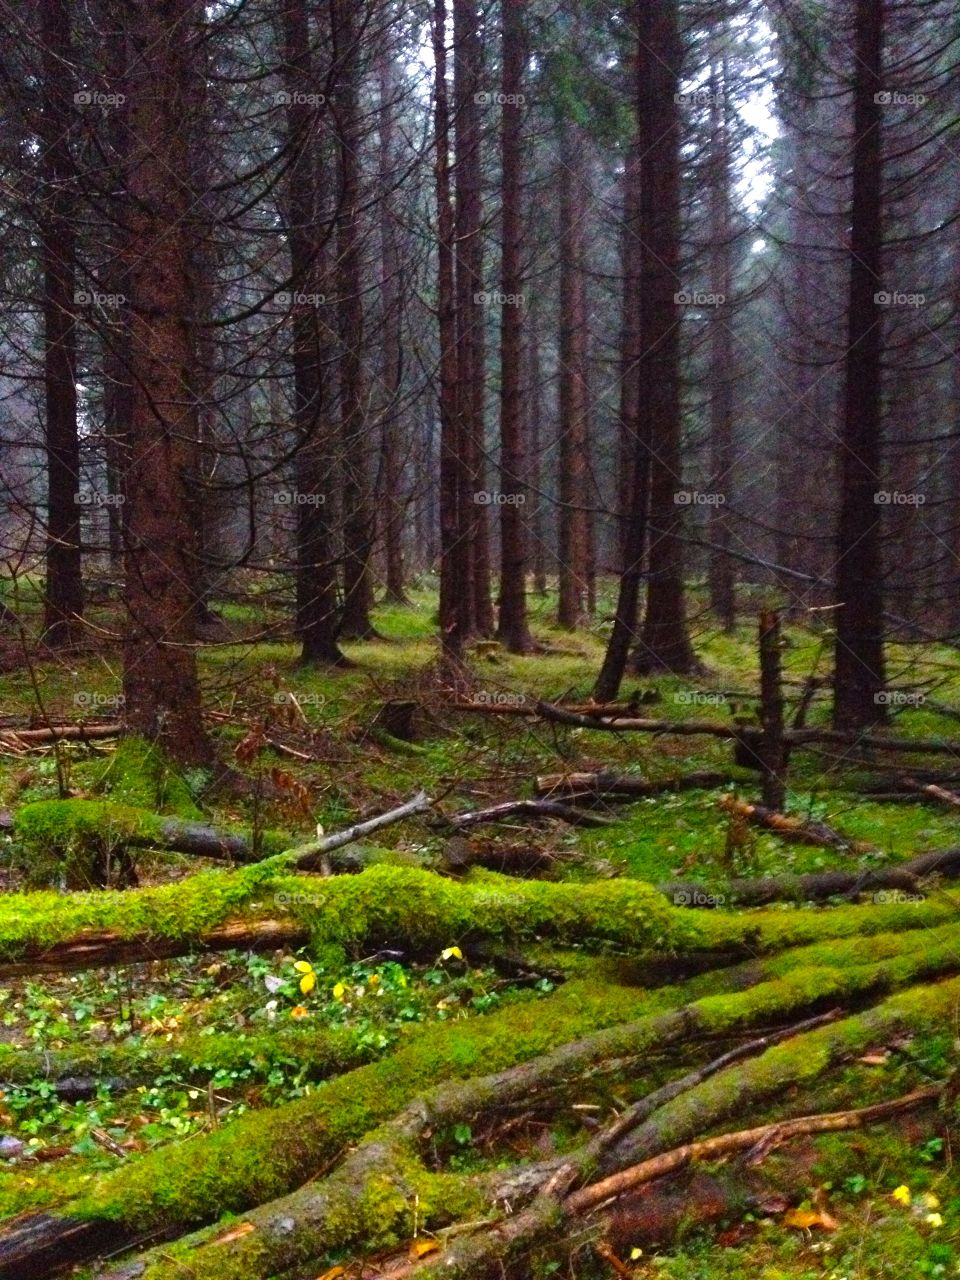 The beauty and smell of forest -Norway